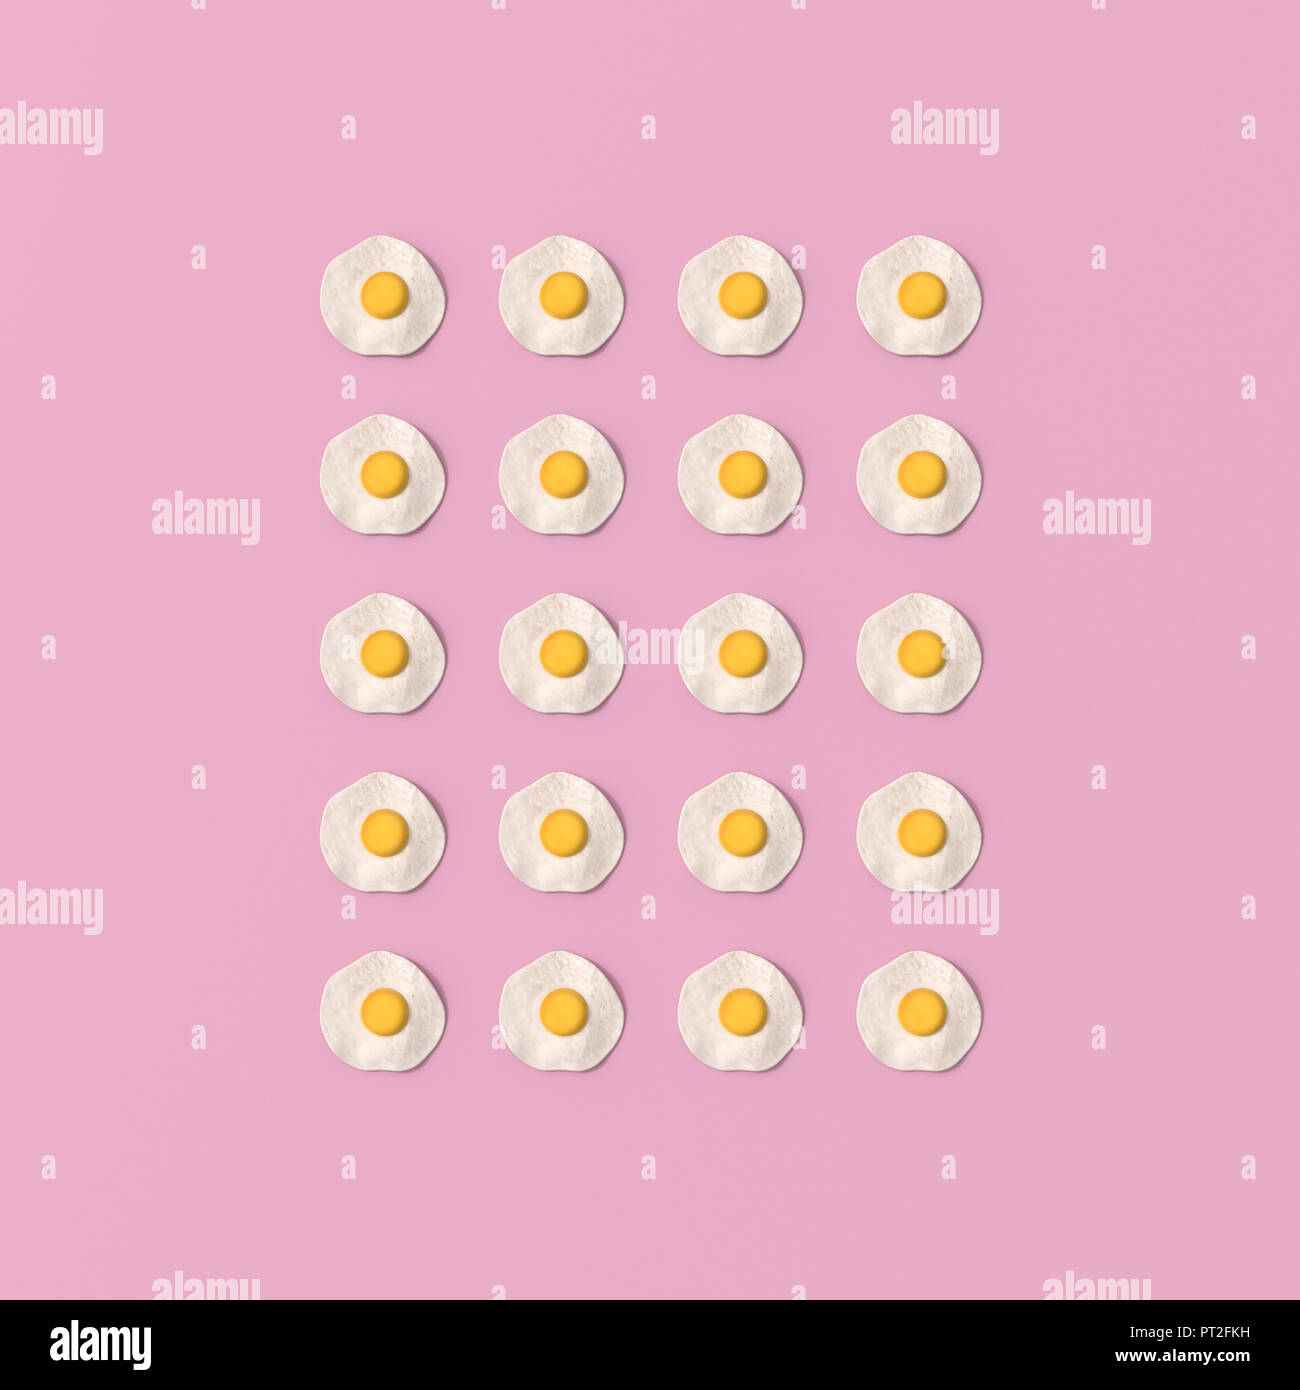 3D rendering, Rows of fried eggs on pink background Stock Photo